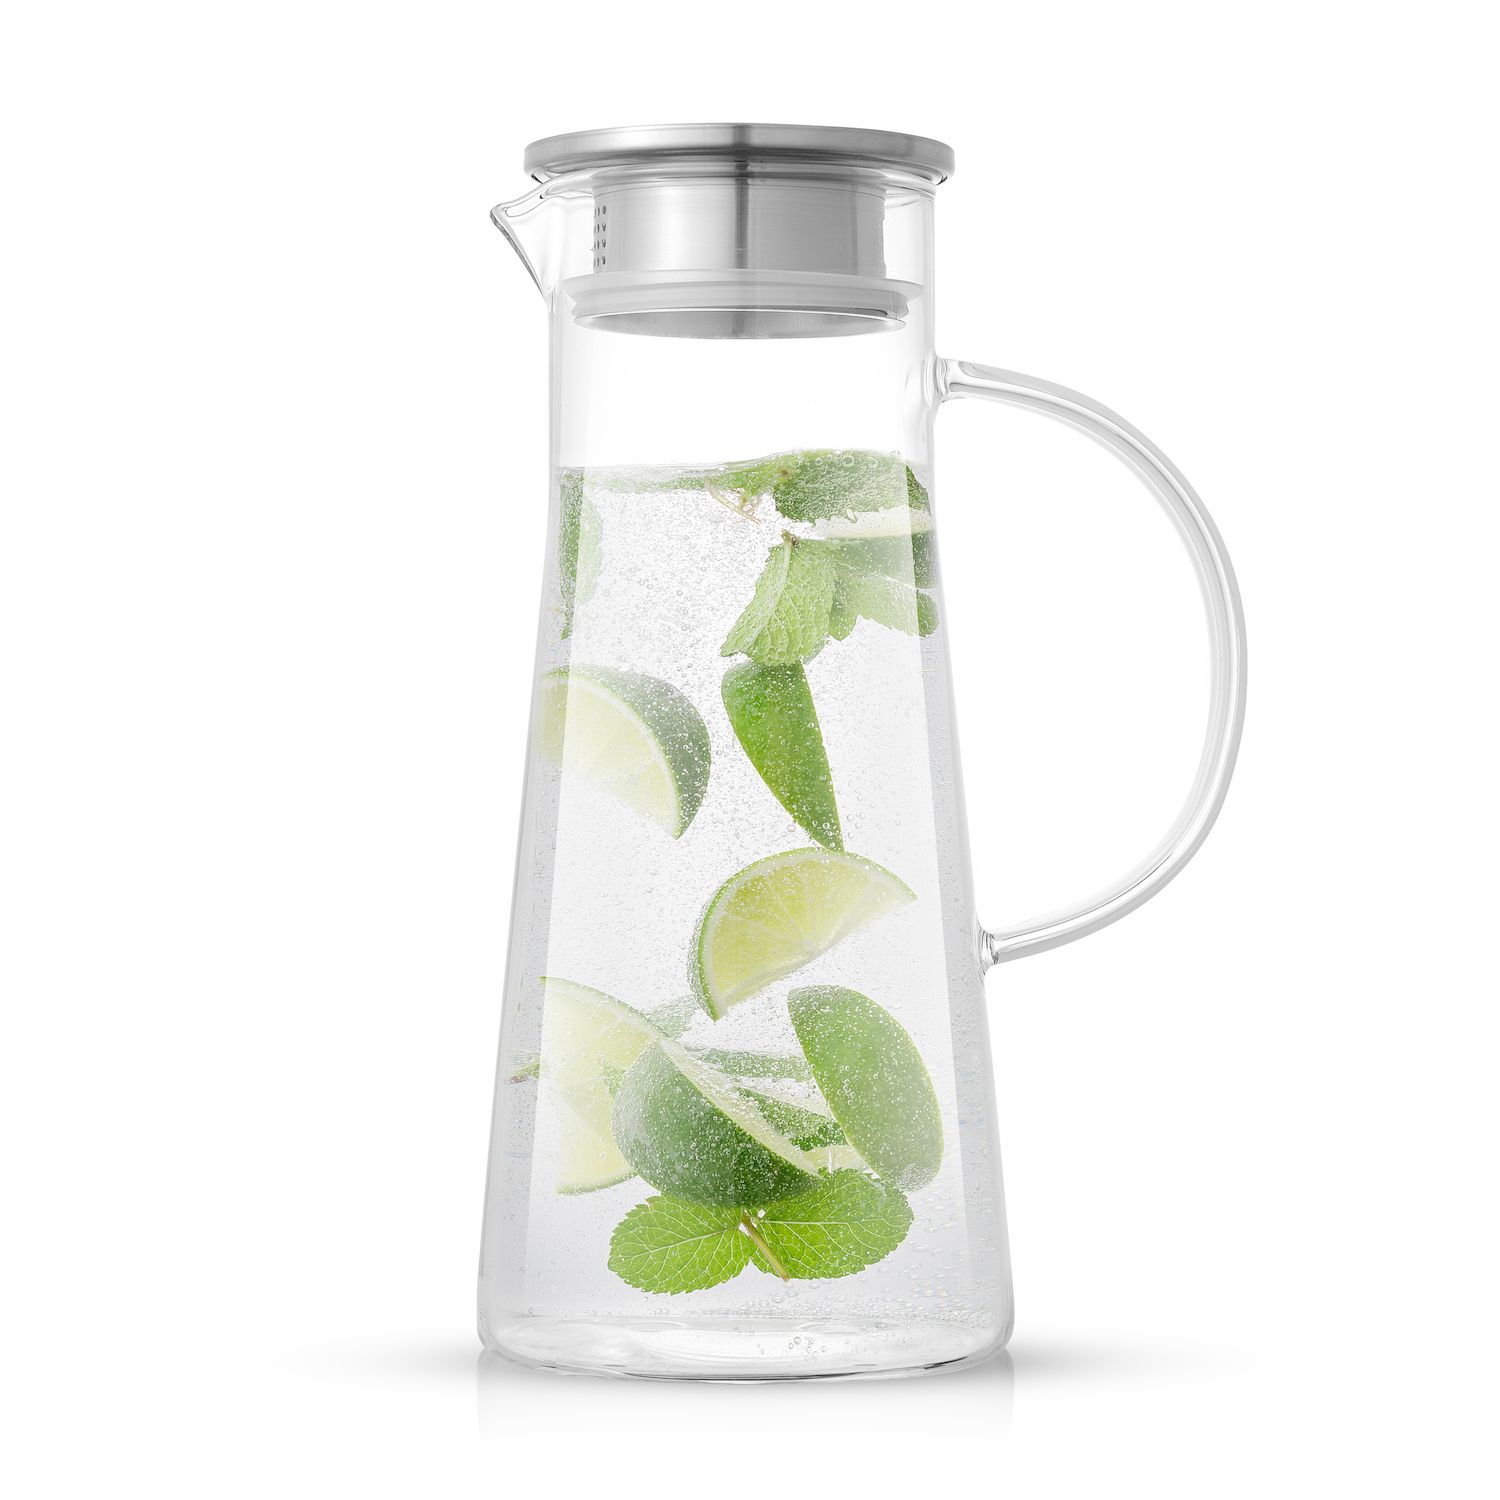 Grosche Bali Glass Infused Water Pitcher & Glassware Gift Set - Clear